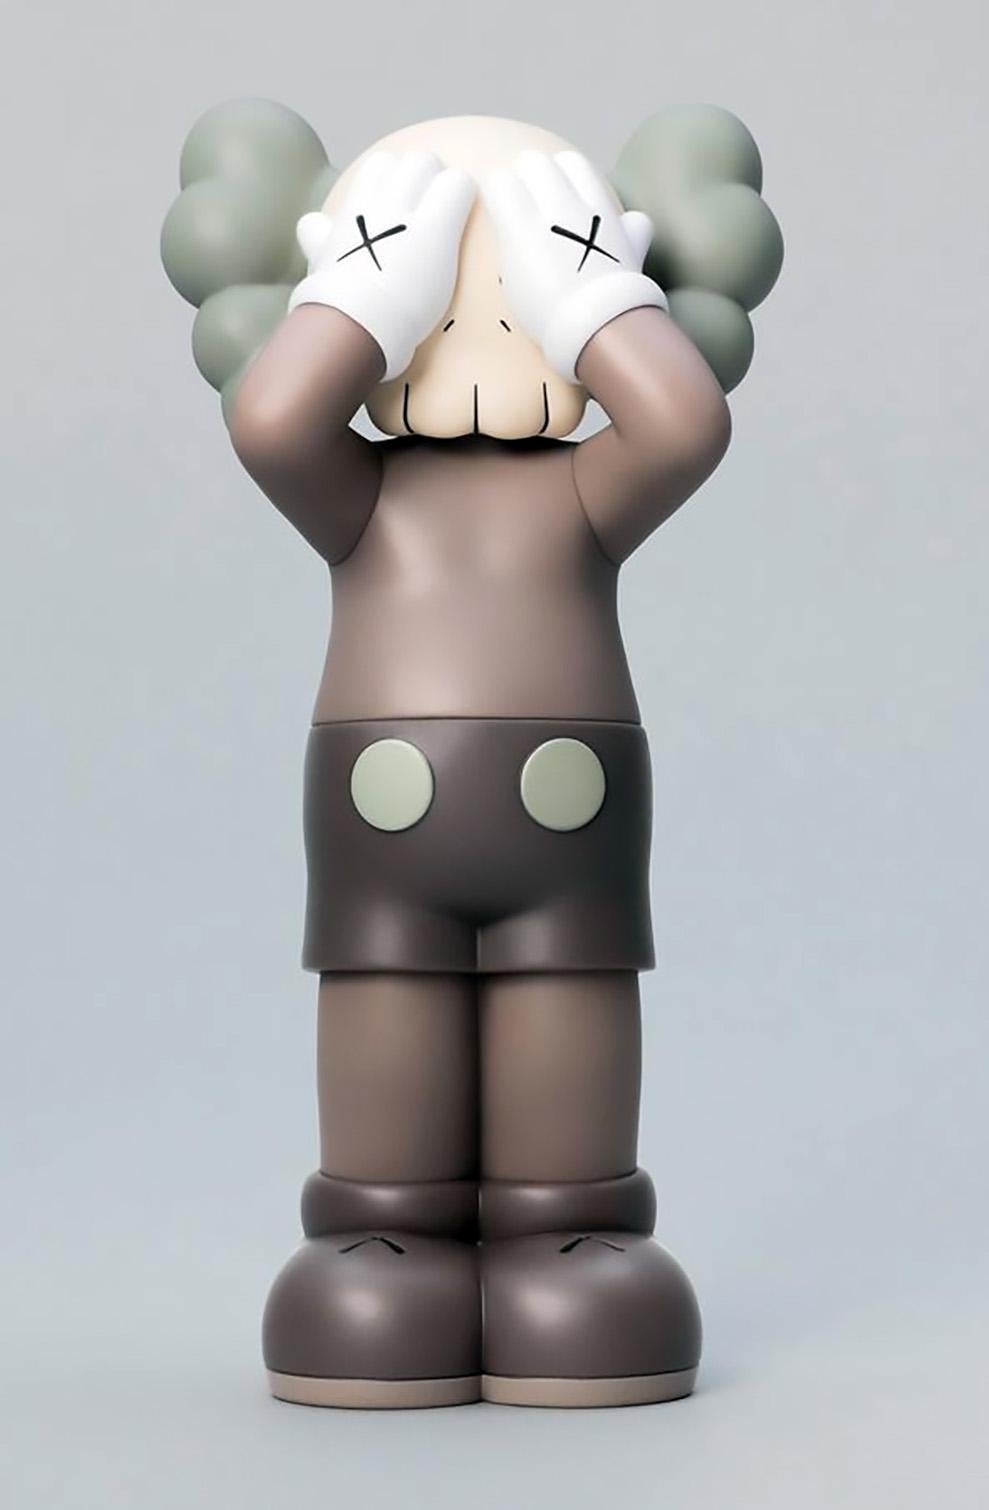 KAWS: HOLIDAY United Kingdom: Complete set of 3 works (KAWS Holiday UK): 
KAWS' signature character COMPANION presented in an upright standing position with its eyes covered. 3 individual works (black, brown, & grey), each new in their original